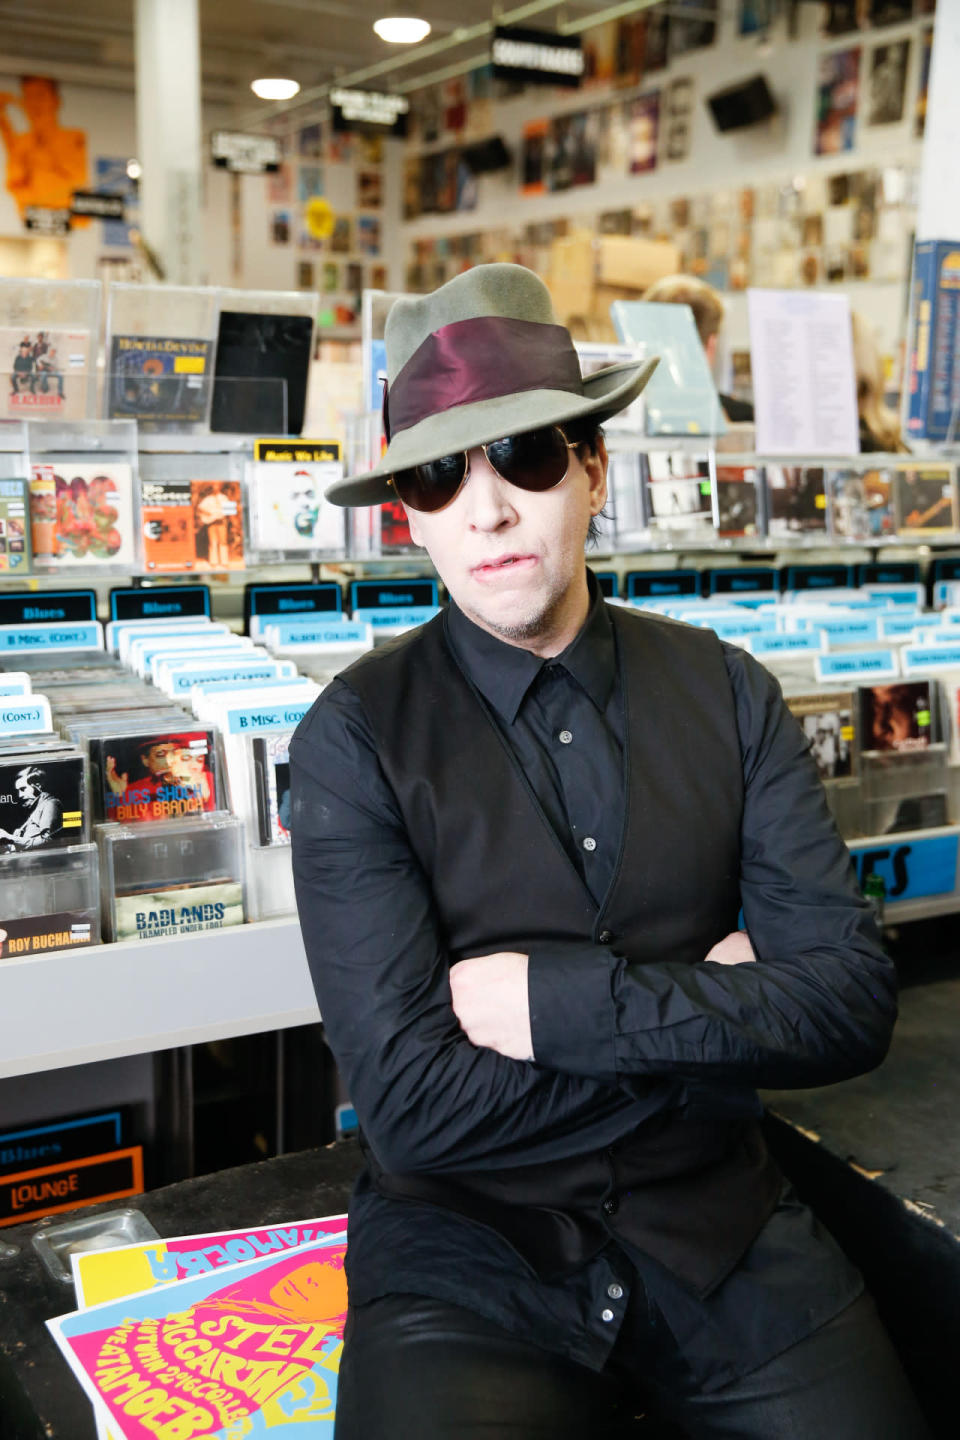 The man in black: Marilyn Manson strikes a pose at Stella McCartney’s autumn 2016 show at Amoeba Music in Los Angeles.